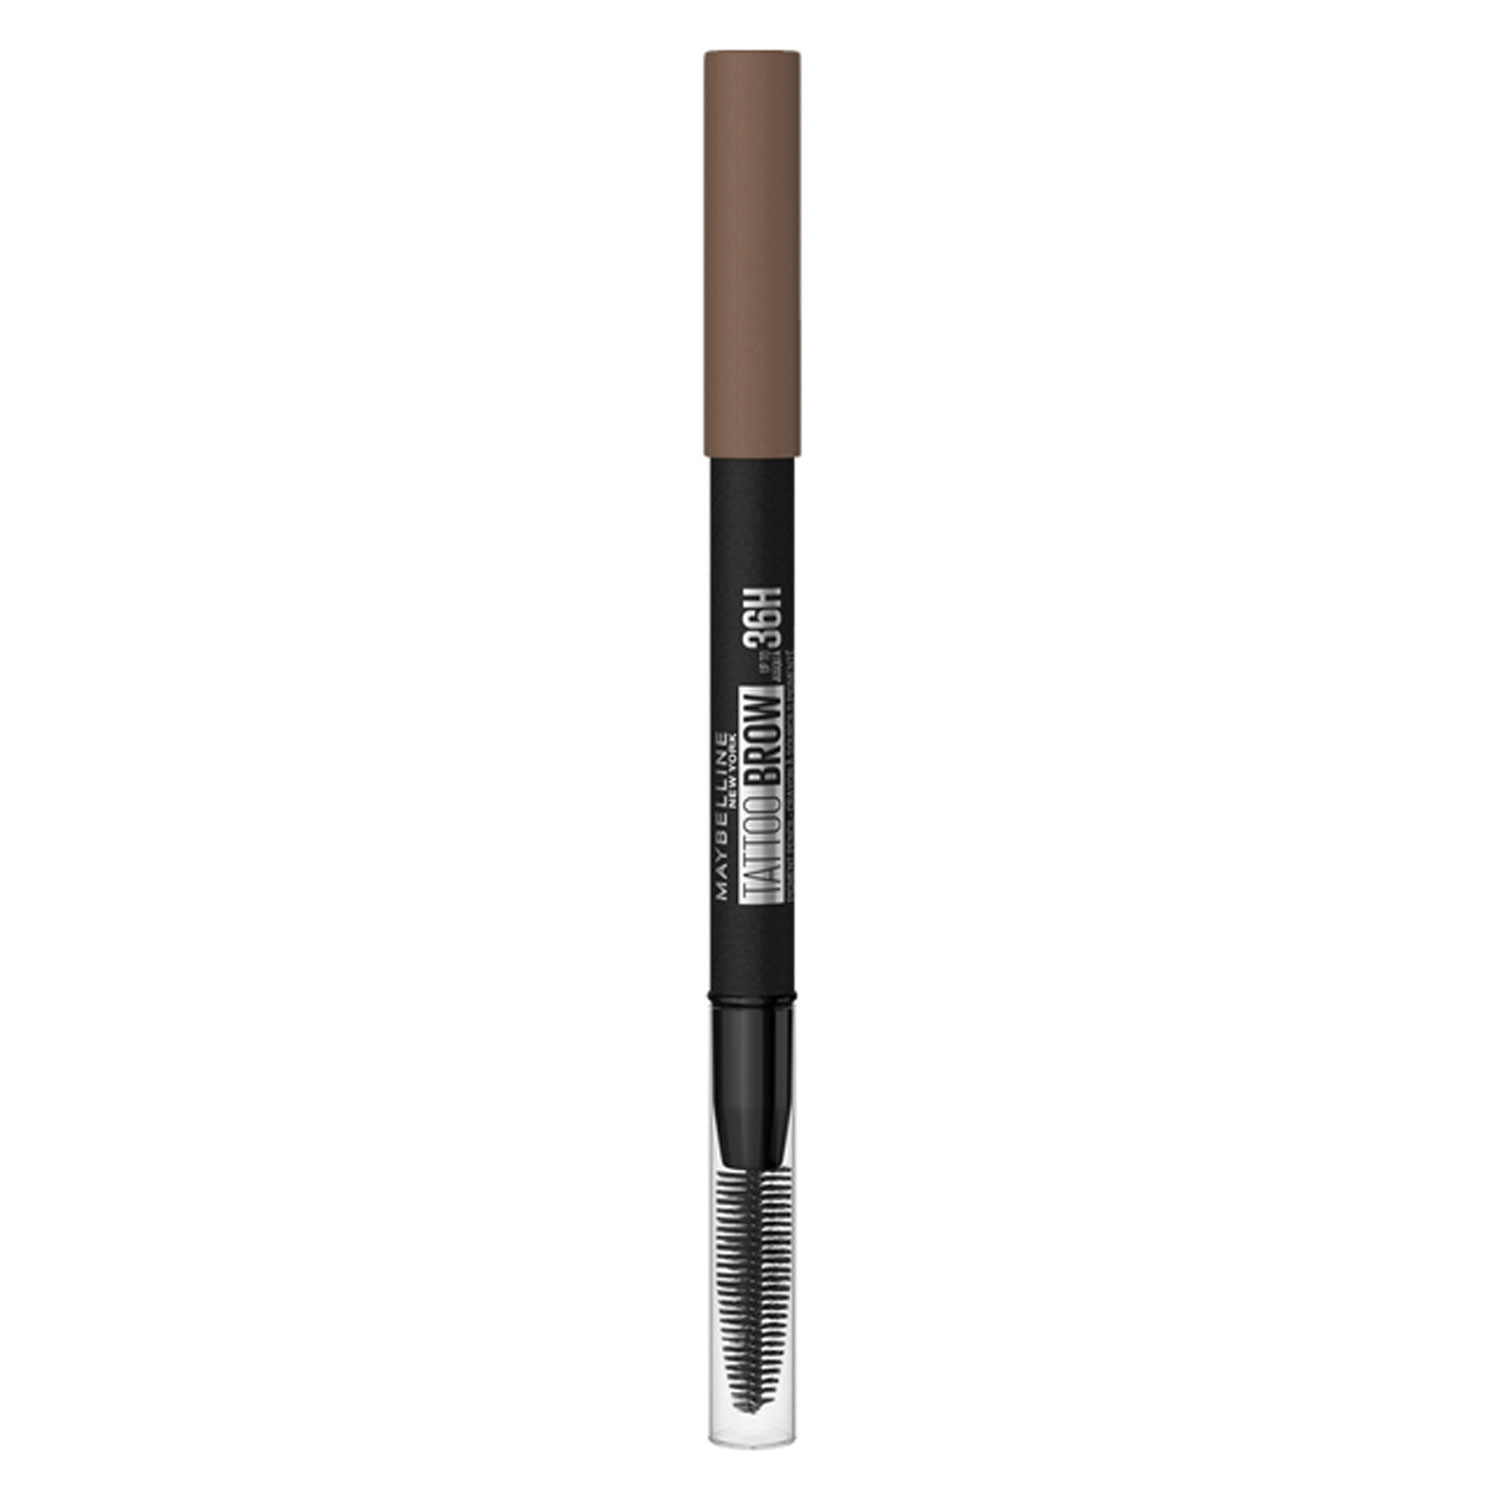 Product image from Maybelline NY Brows - Tattoo Brow 36H Augenbrauenstift Nr. 6 Ash Brown